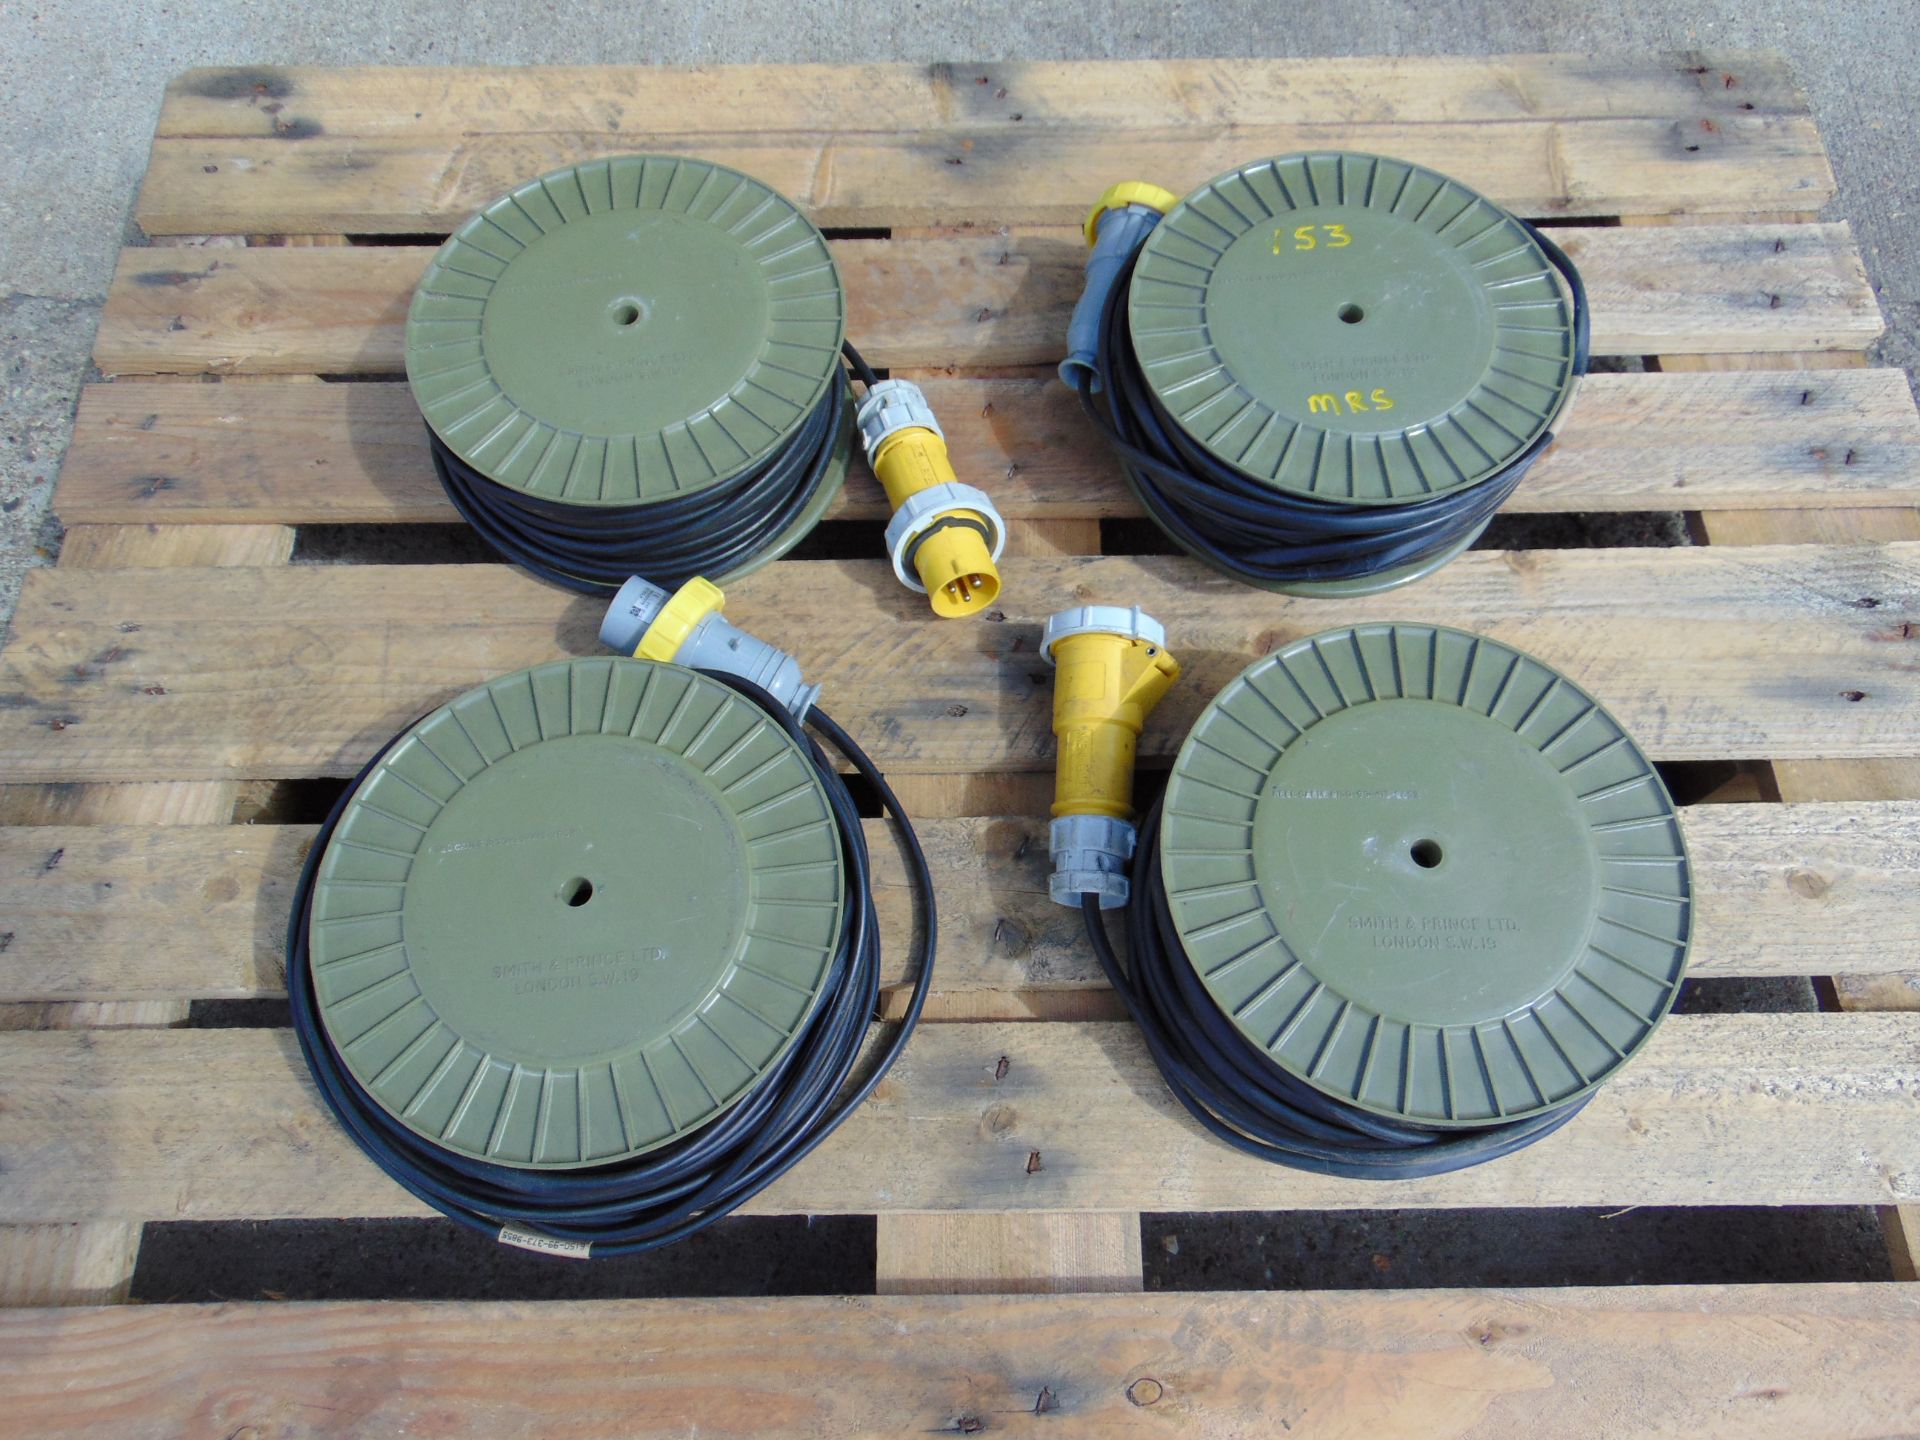 4 x 90ft 110v Cable Reels